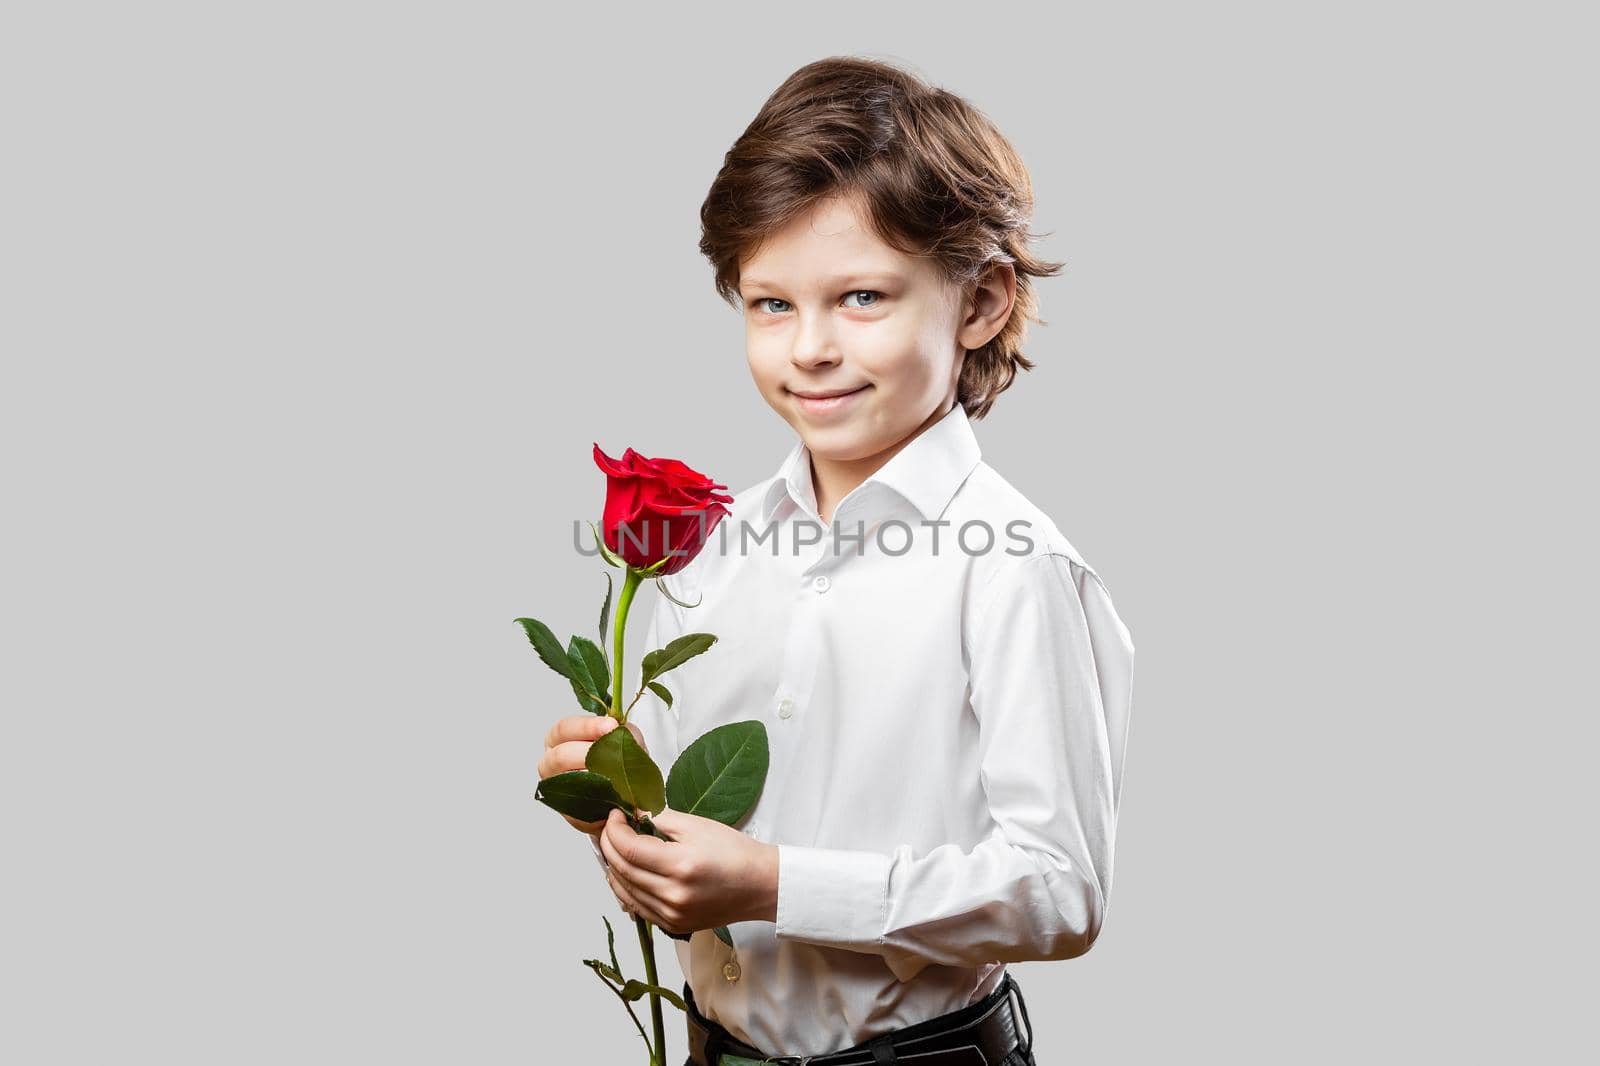 Boy holding a red rose flower for Valentines day by Syvanych